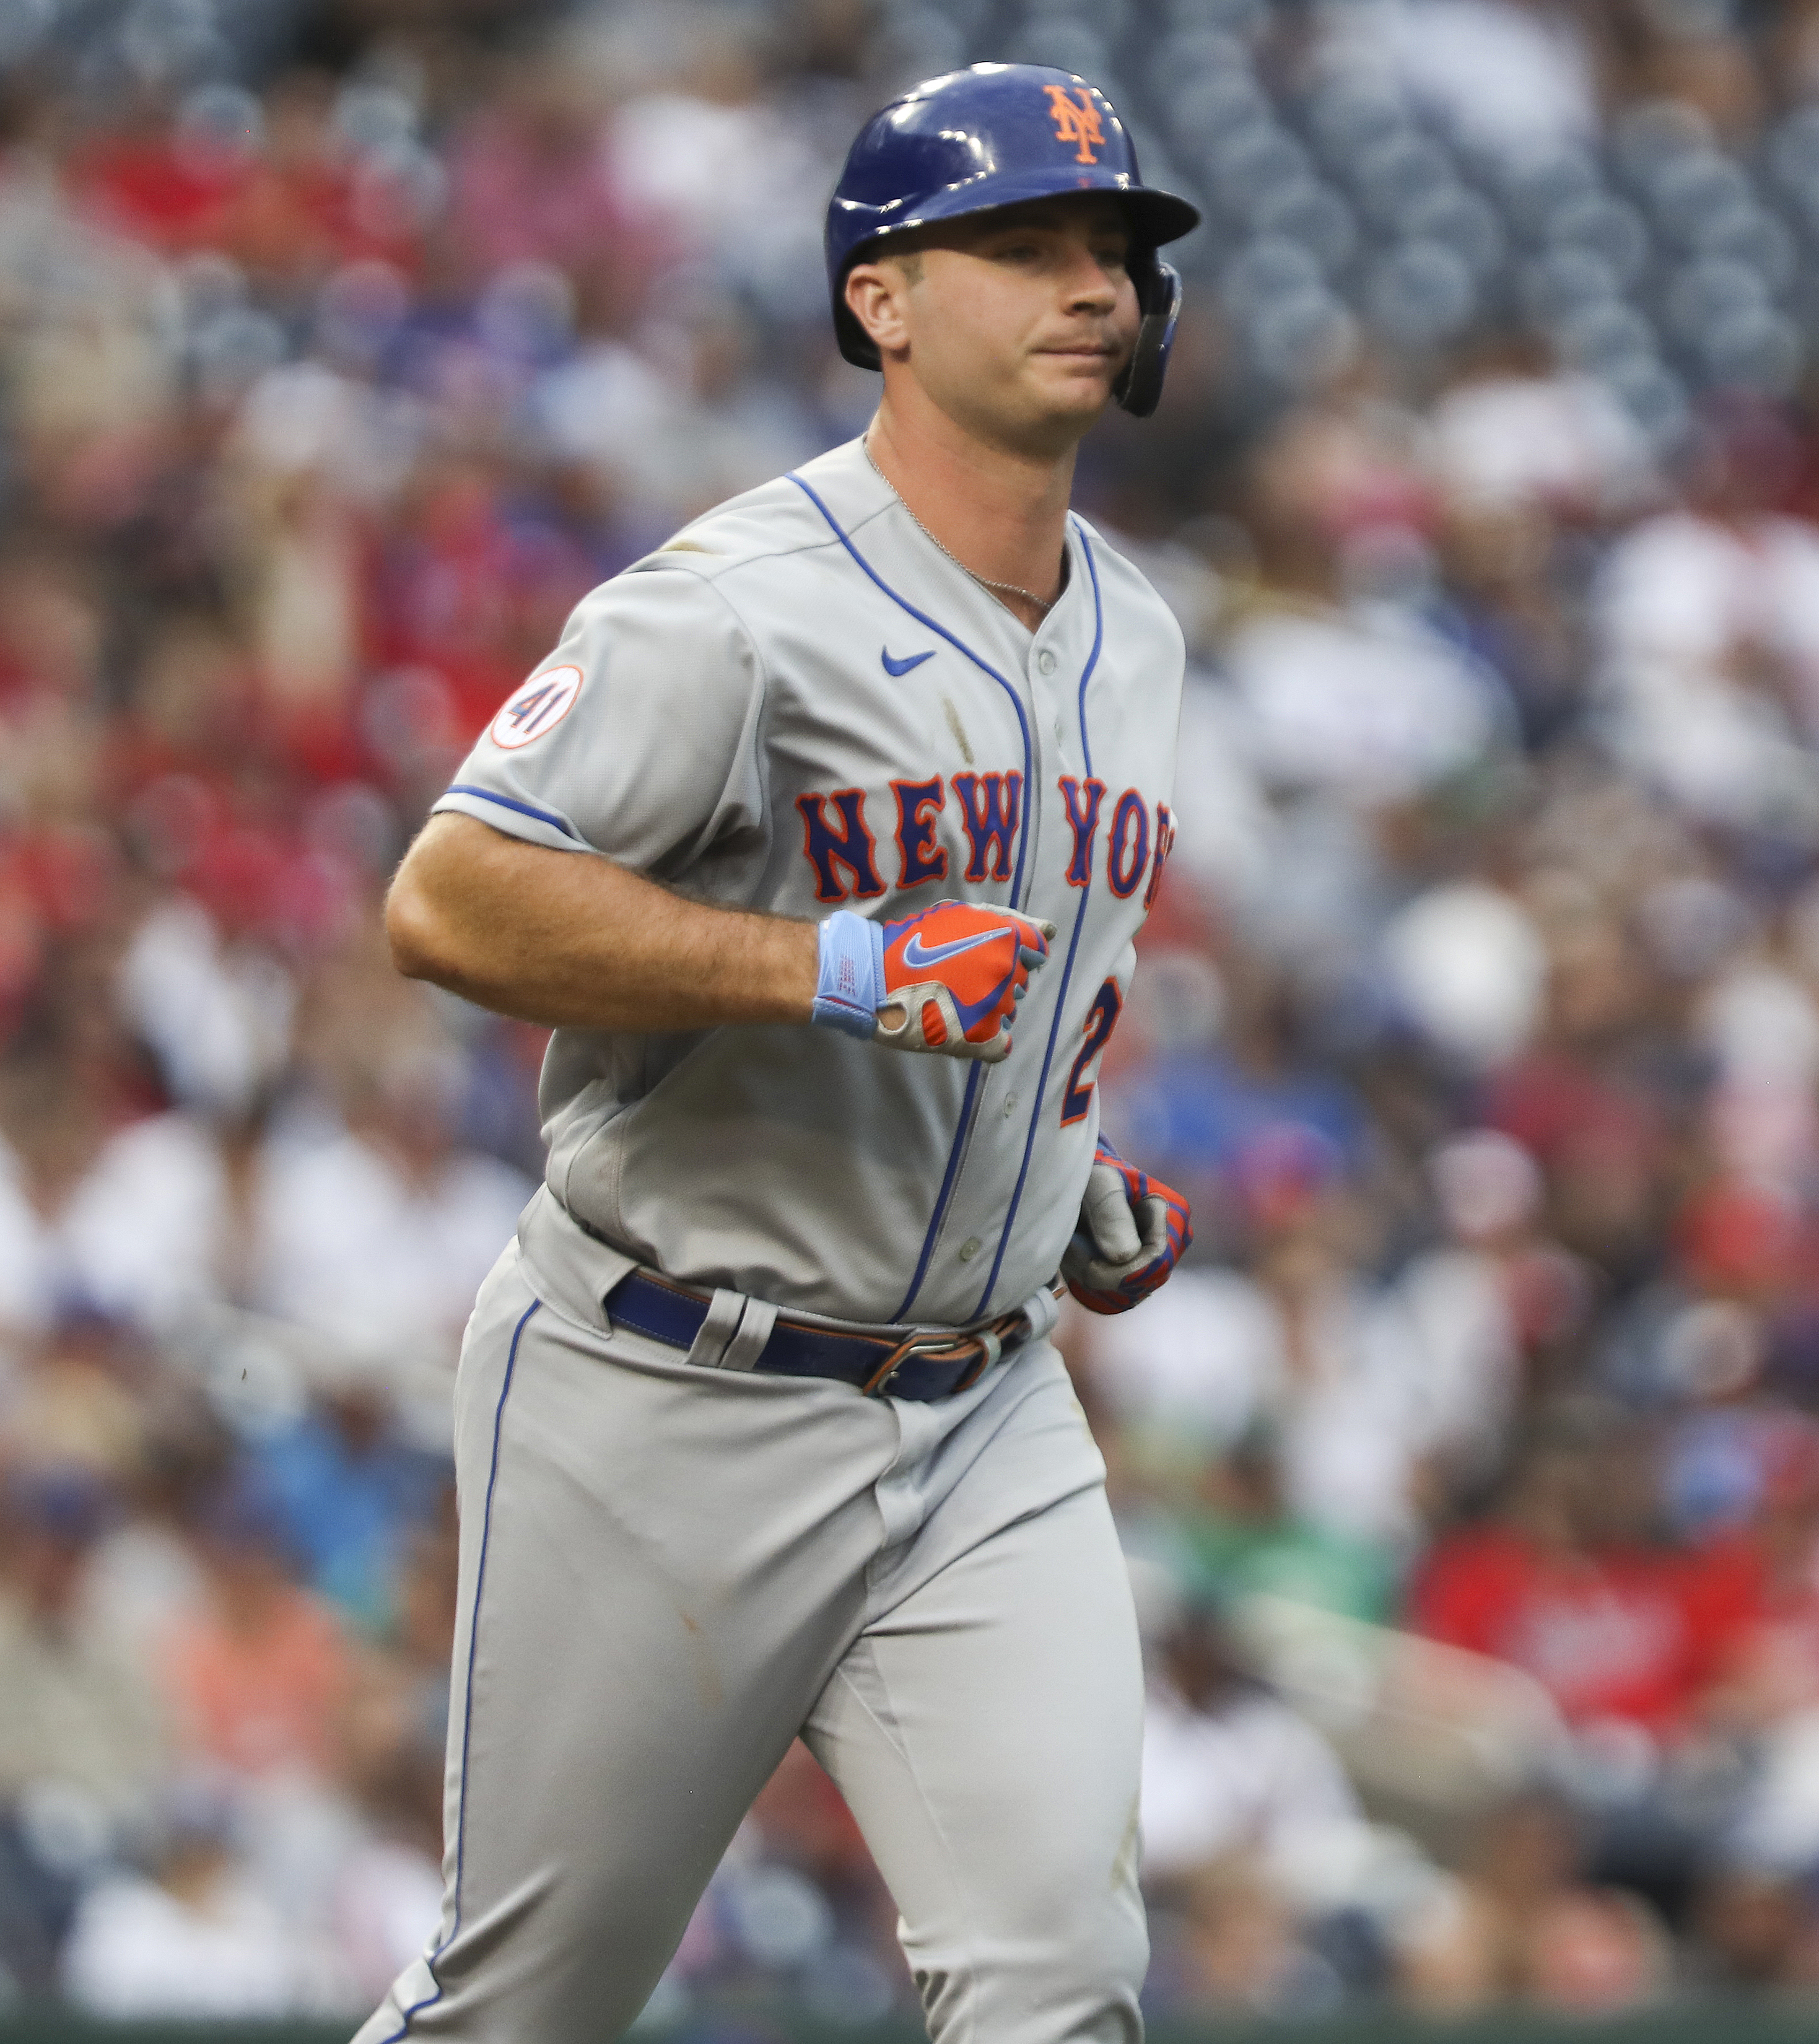 Pete Alonso hits 1 of Mets' 5 homers to back José Quintana in 11-5